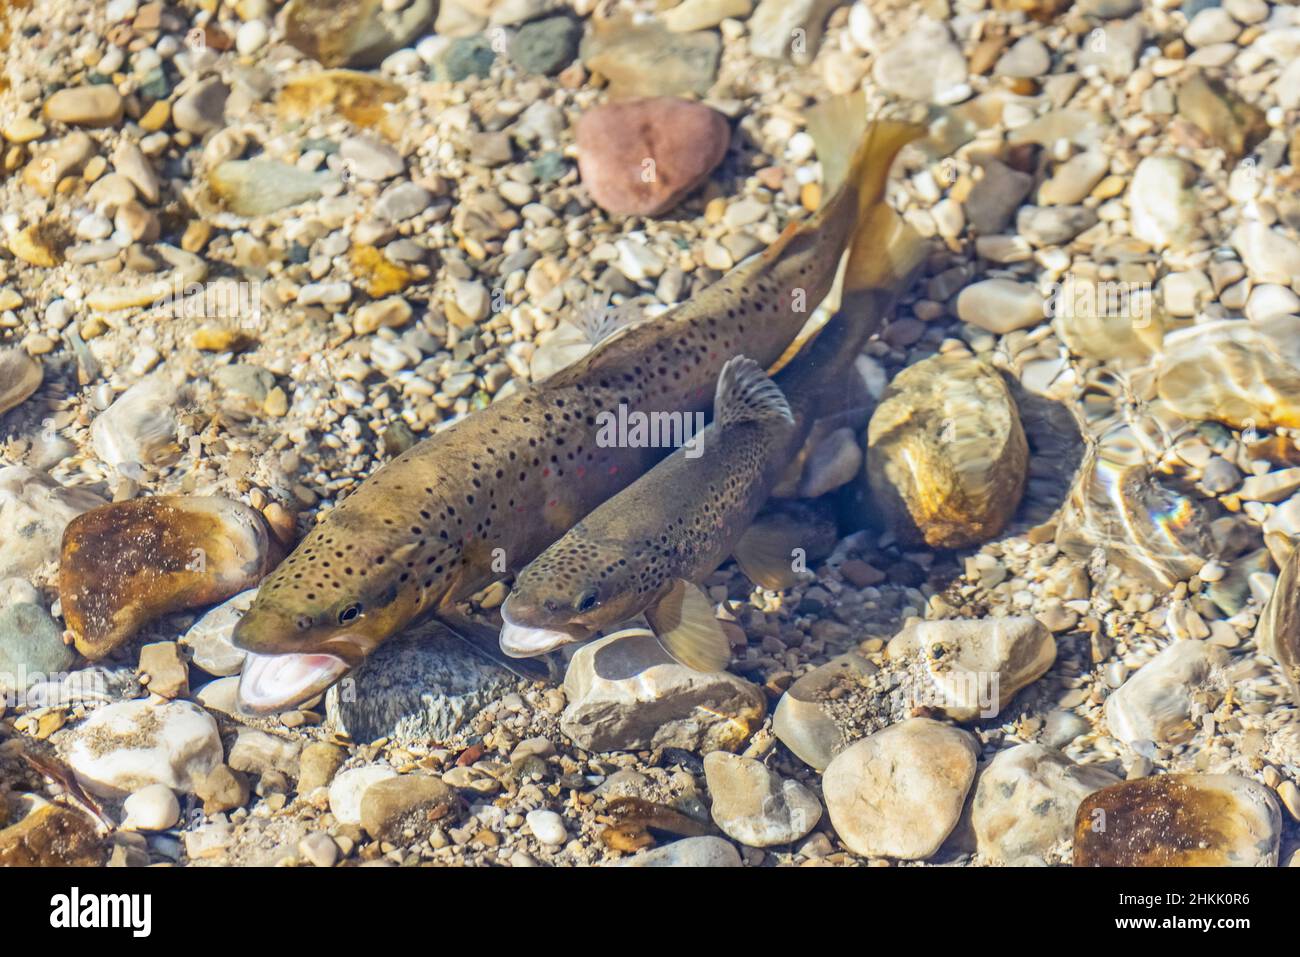 brown trout, river trout, brook trout (Salmo trutta fario), spawning pair, female laying eggs, Germany, Bavaria Stock Photo